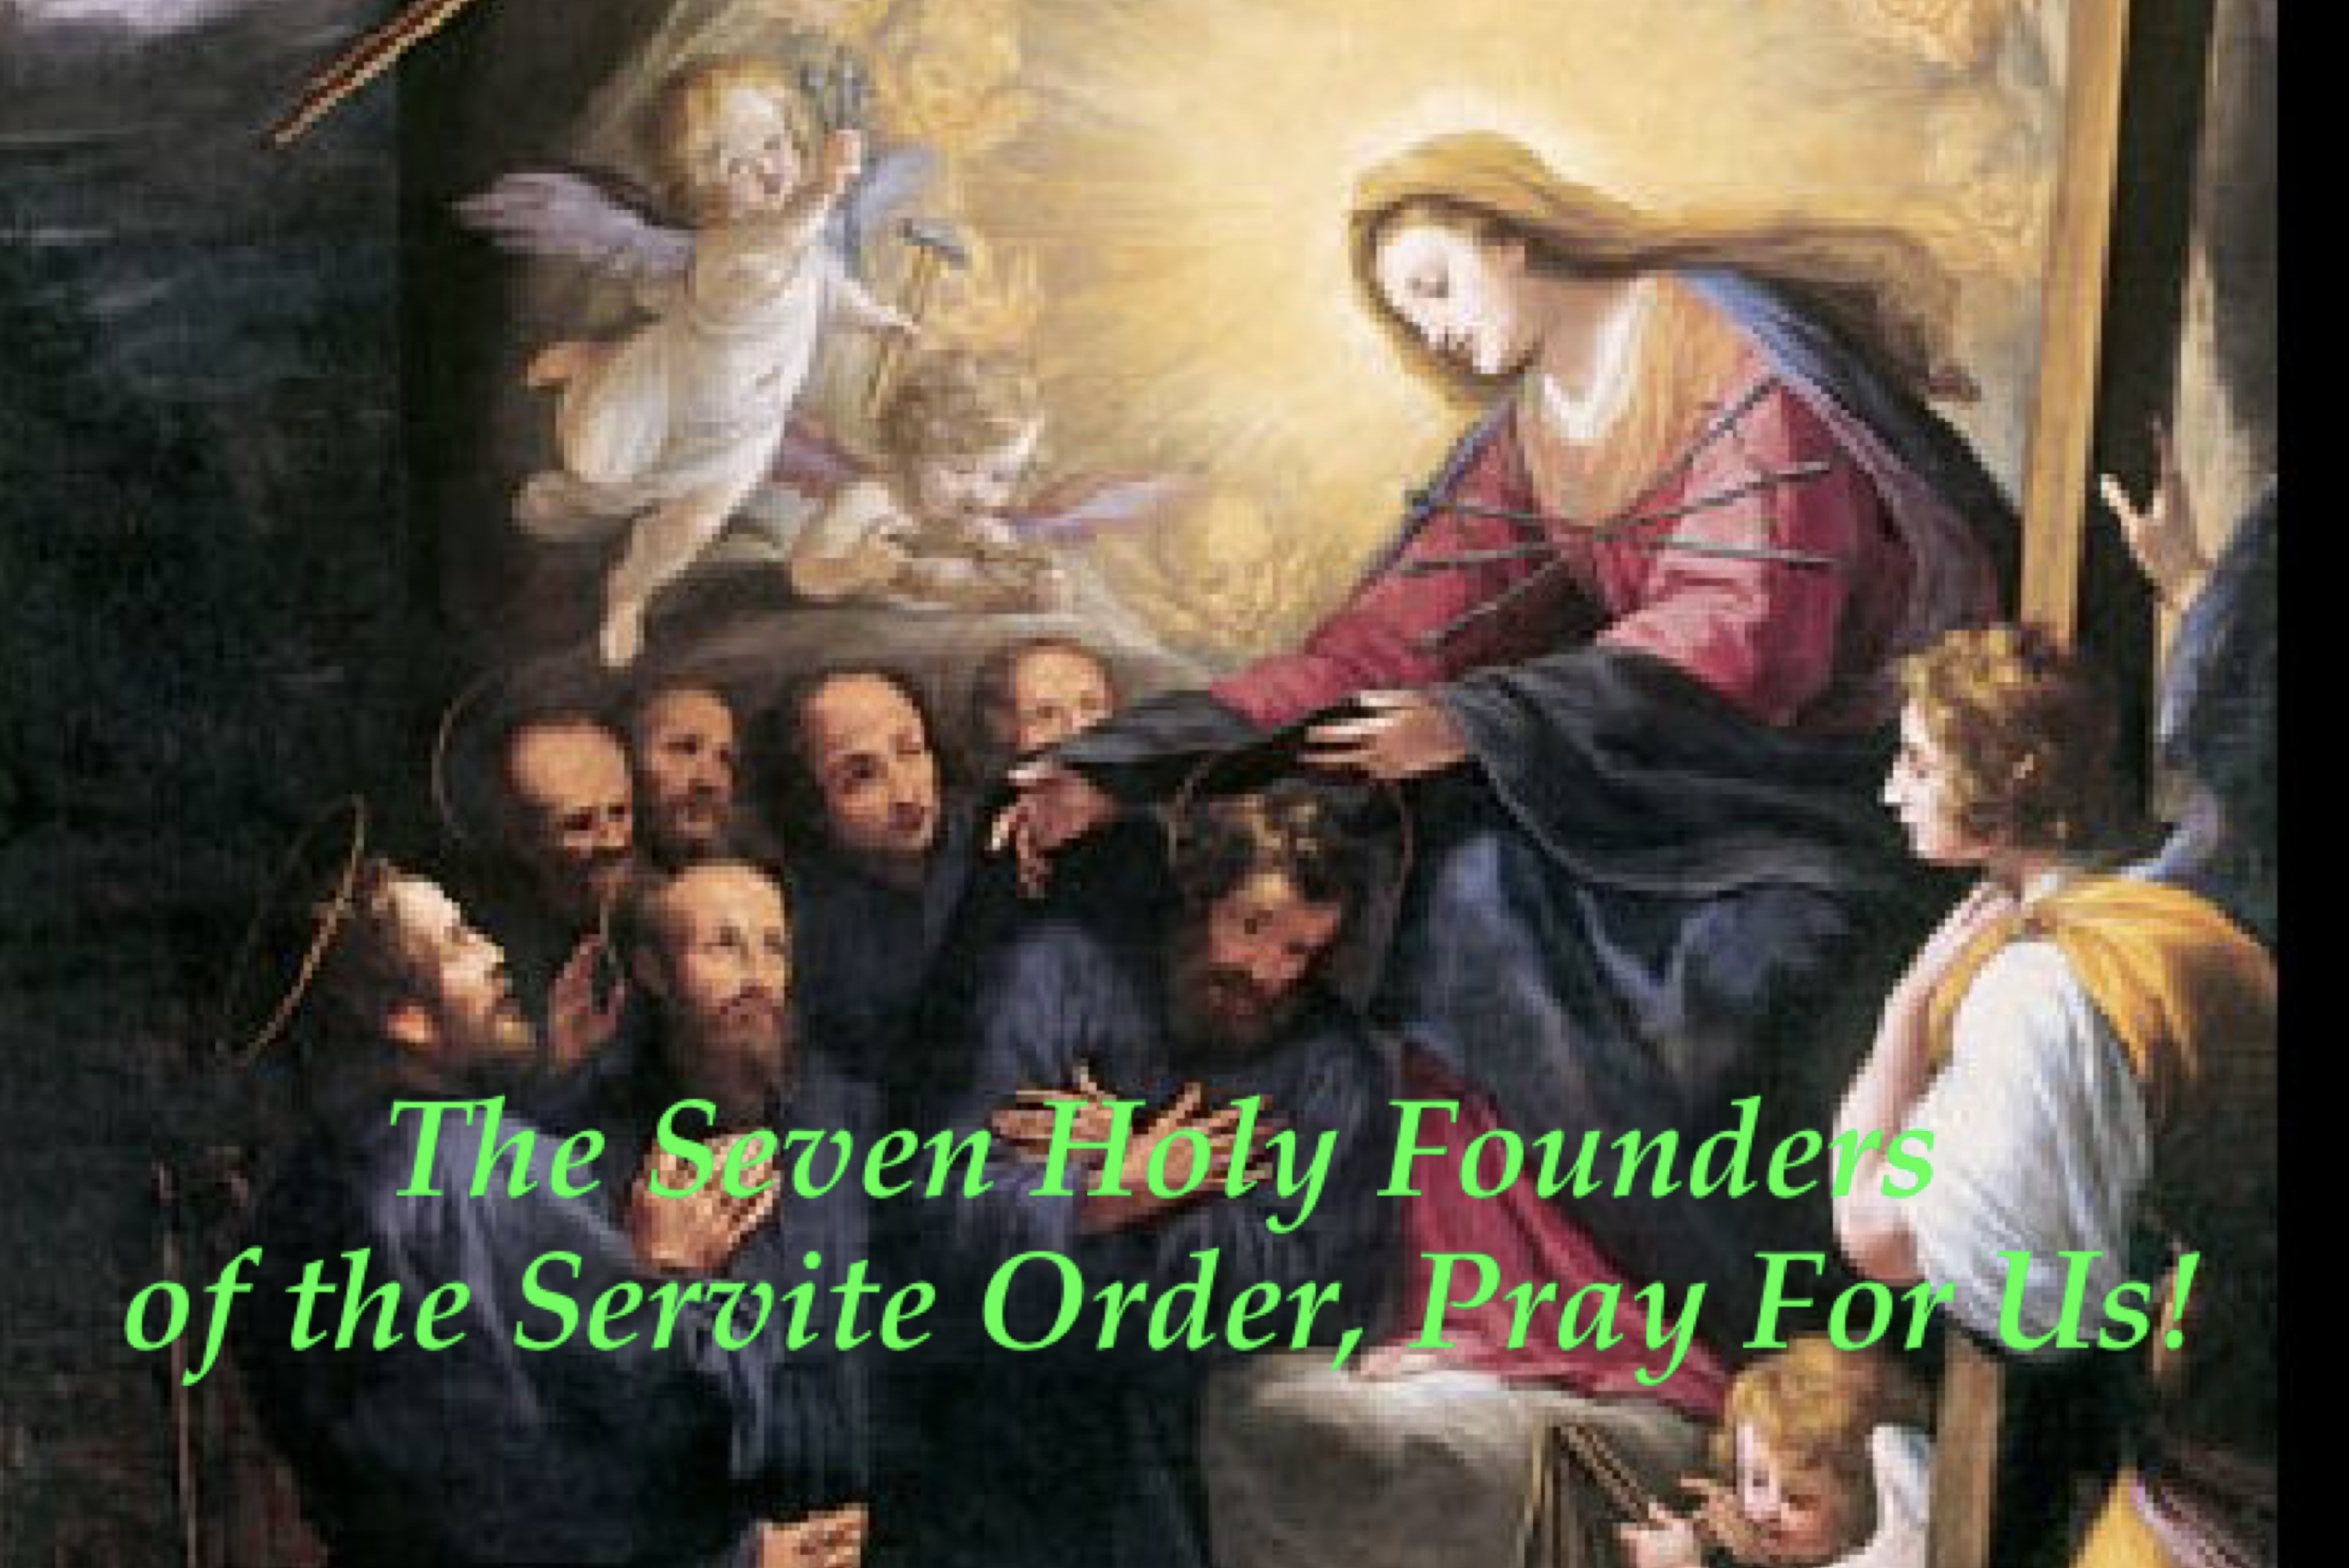 17th February - The Seven Holy Founders of the Servite Order